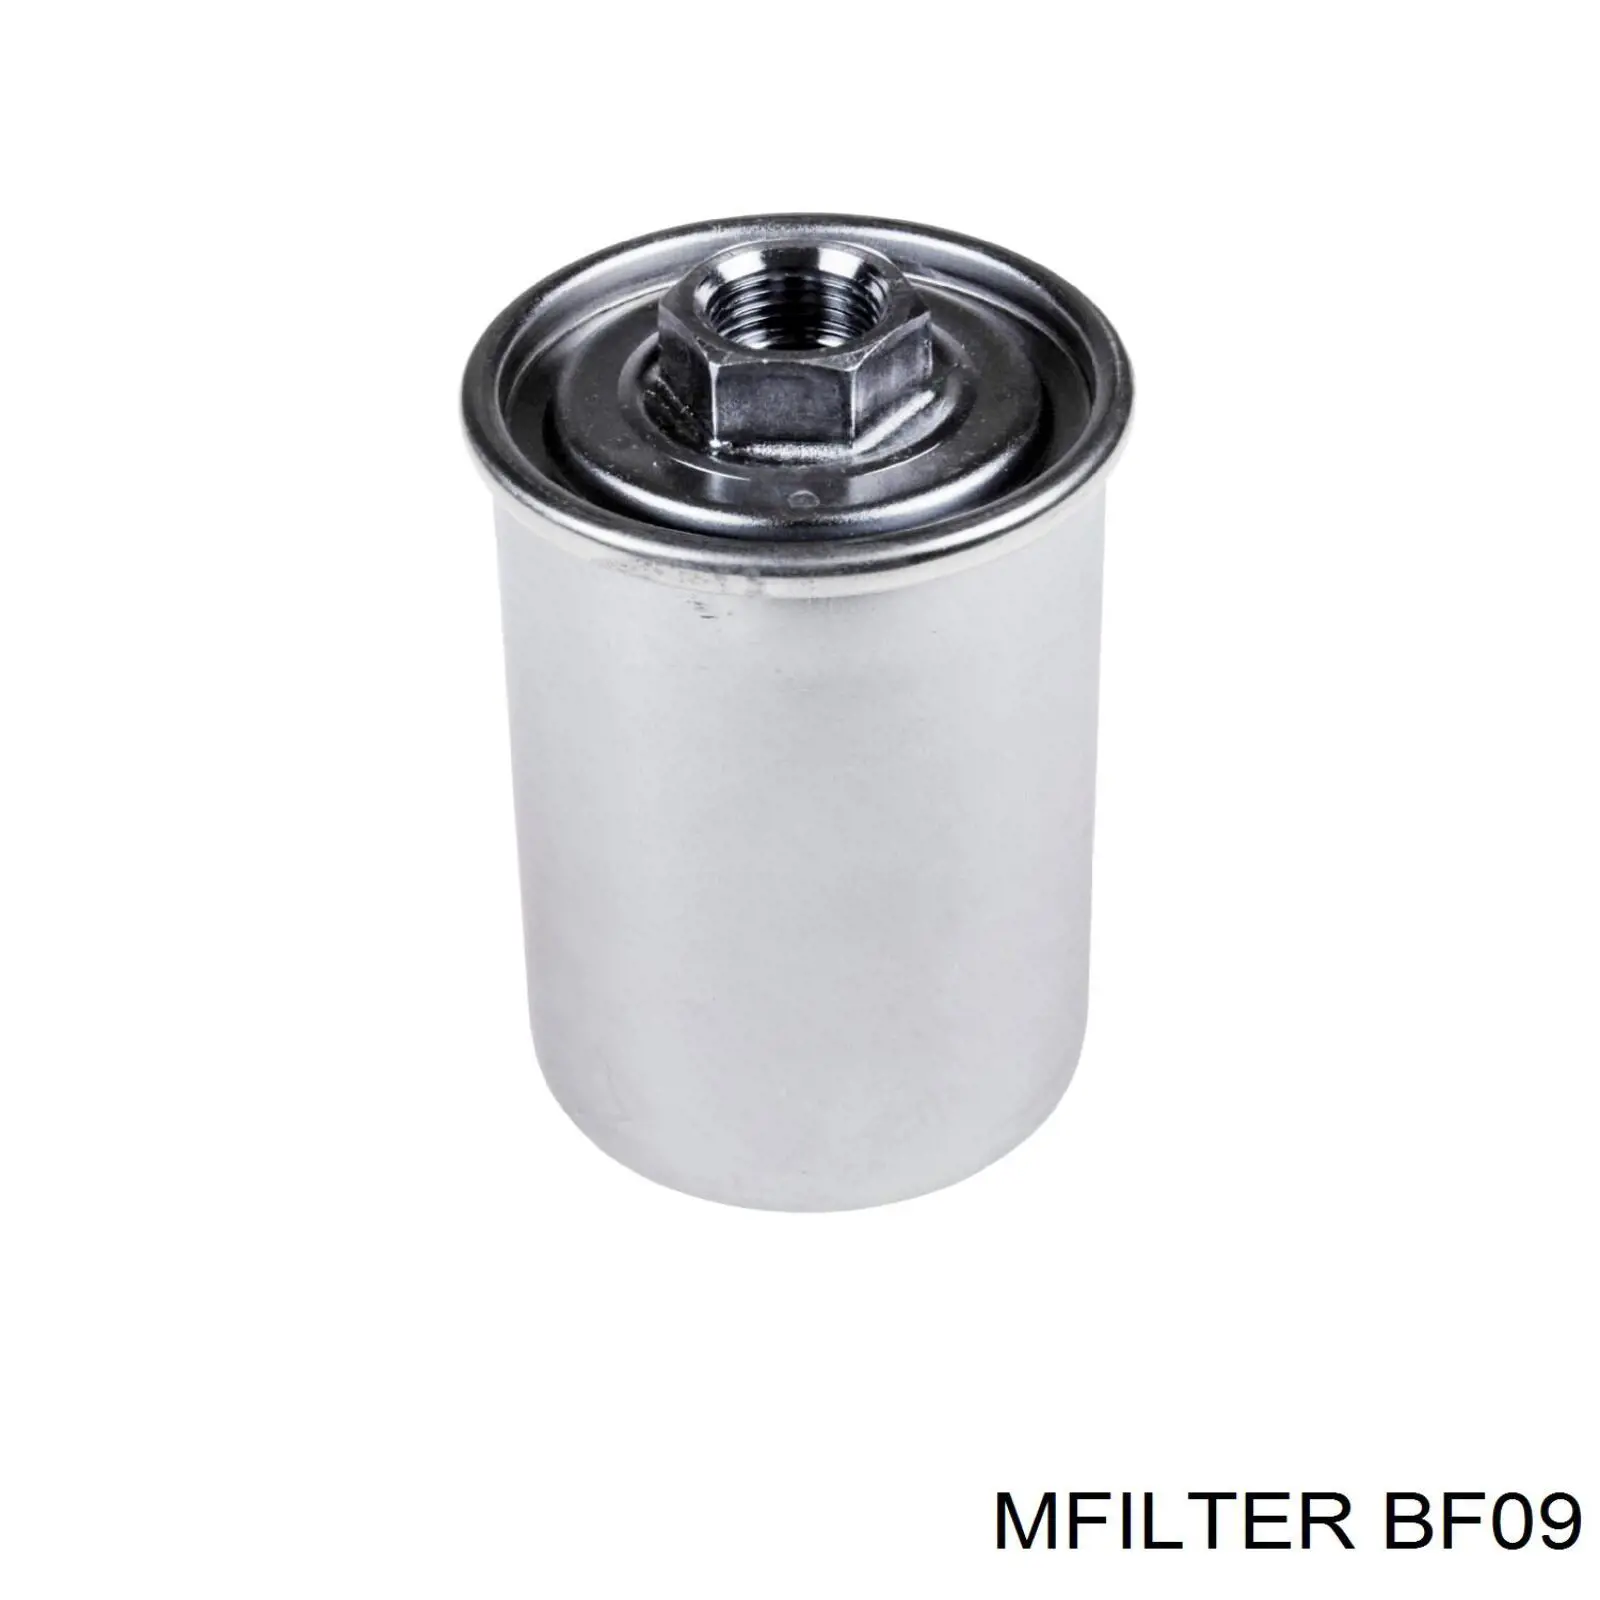 BF09 Mfilter filtro combustible